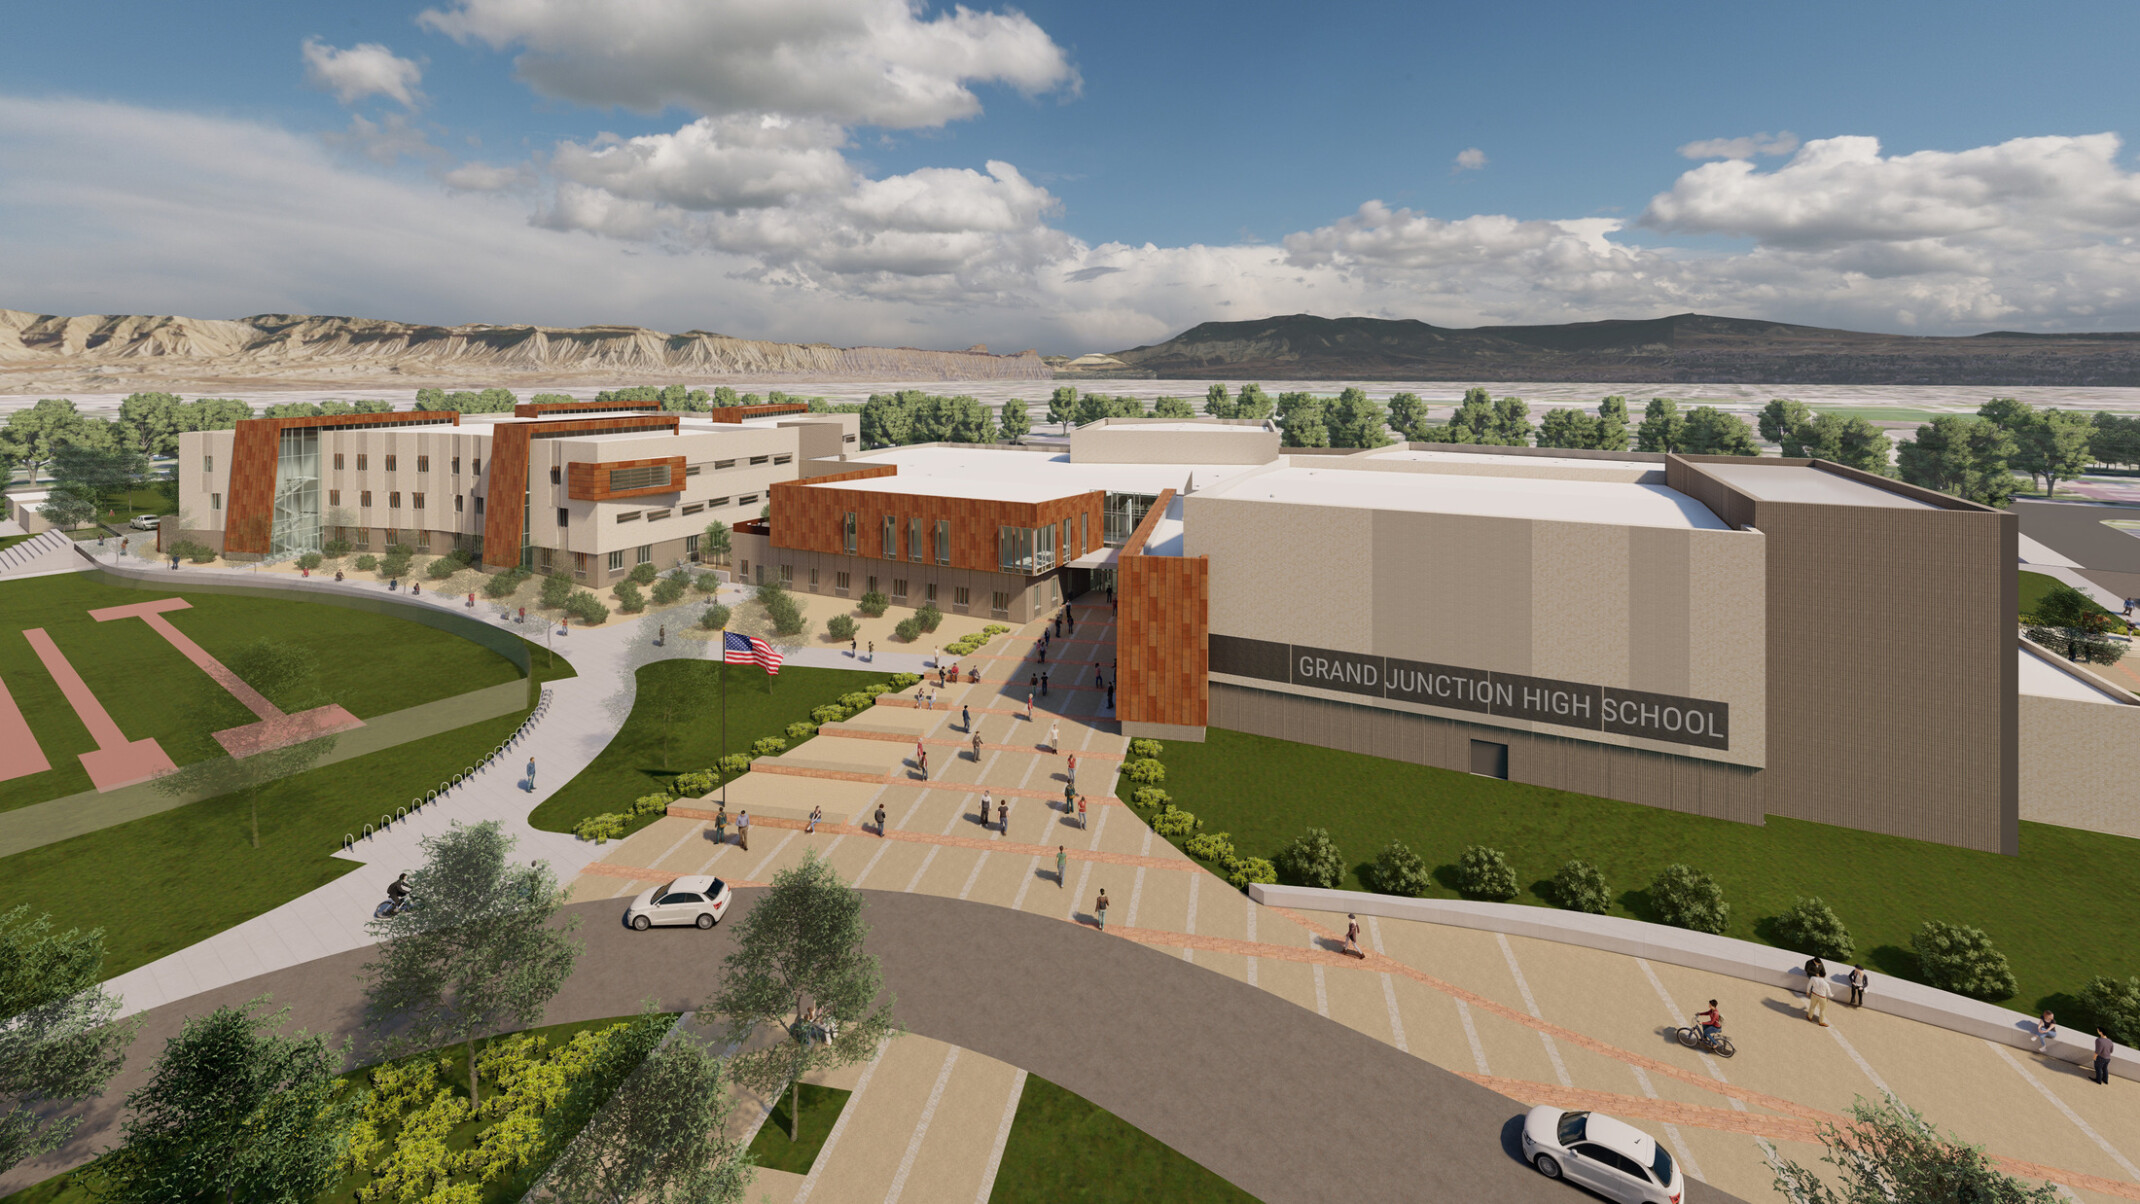 long shot aerial view design concept, campus grounds, mass-timber and brick façade, signage, four academies, large windows, green space, trees, people on paved pathways, parking lot, mountains in distance, blue skies, puffy white clouds